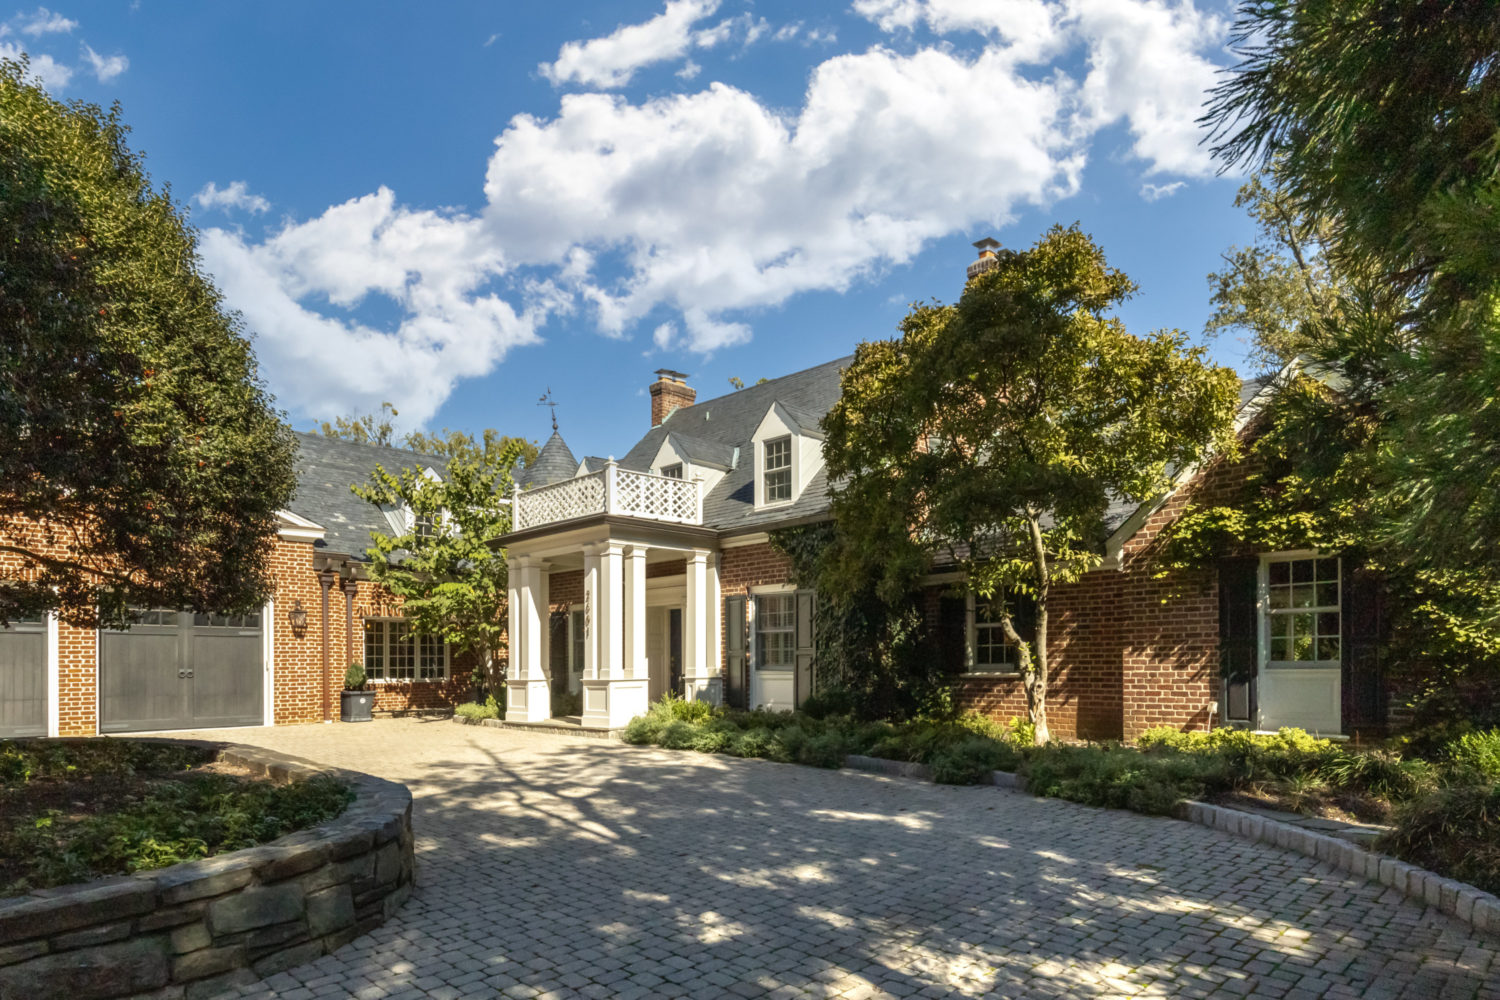 Check Out This Beautifully Transformed Williamsburg-Inspired Brick Colonial